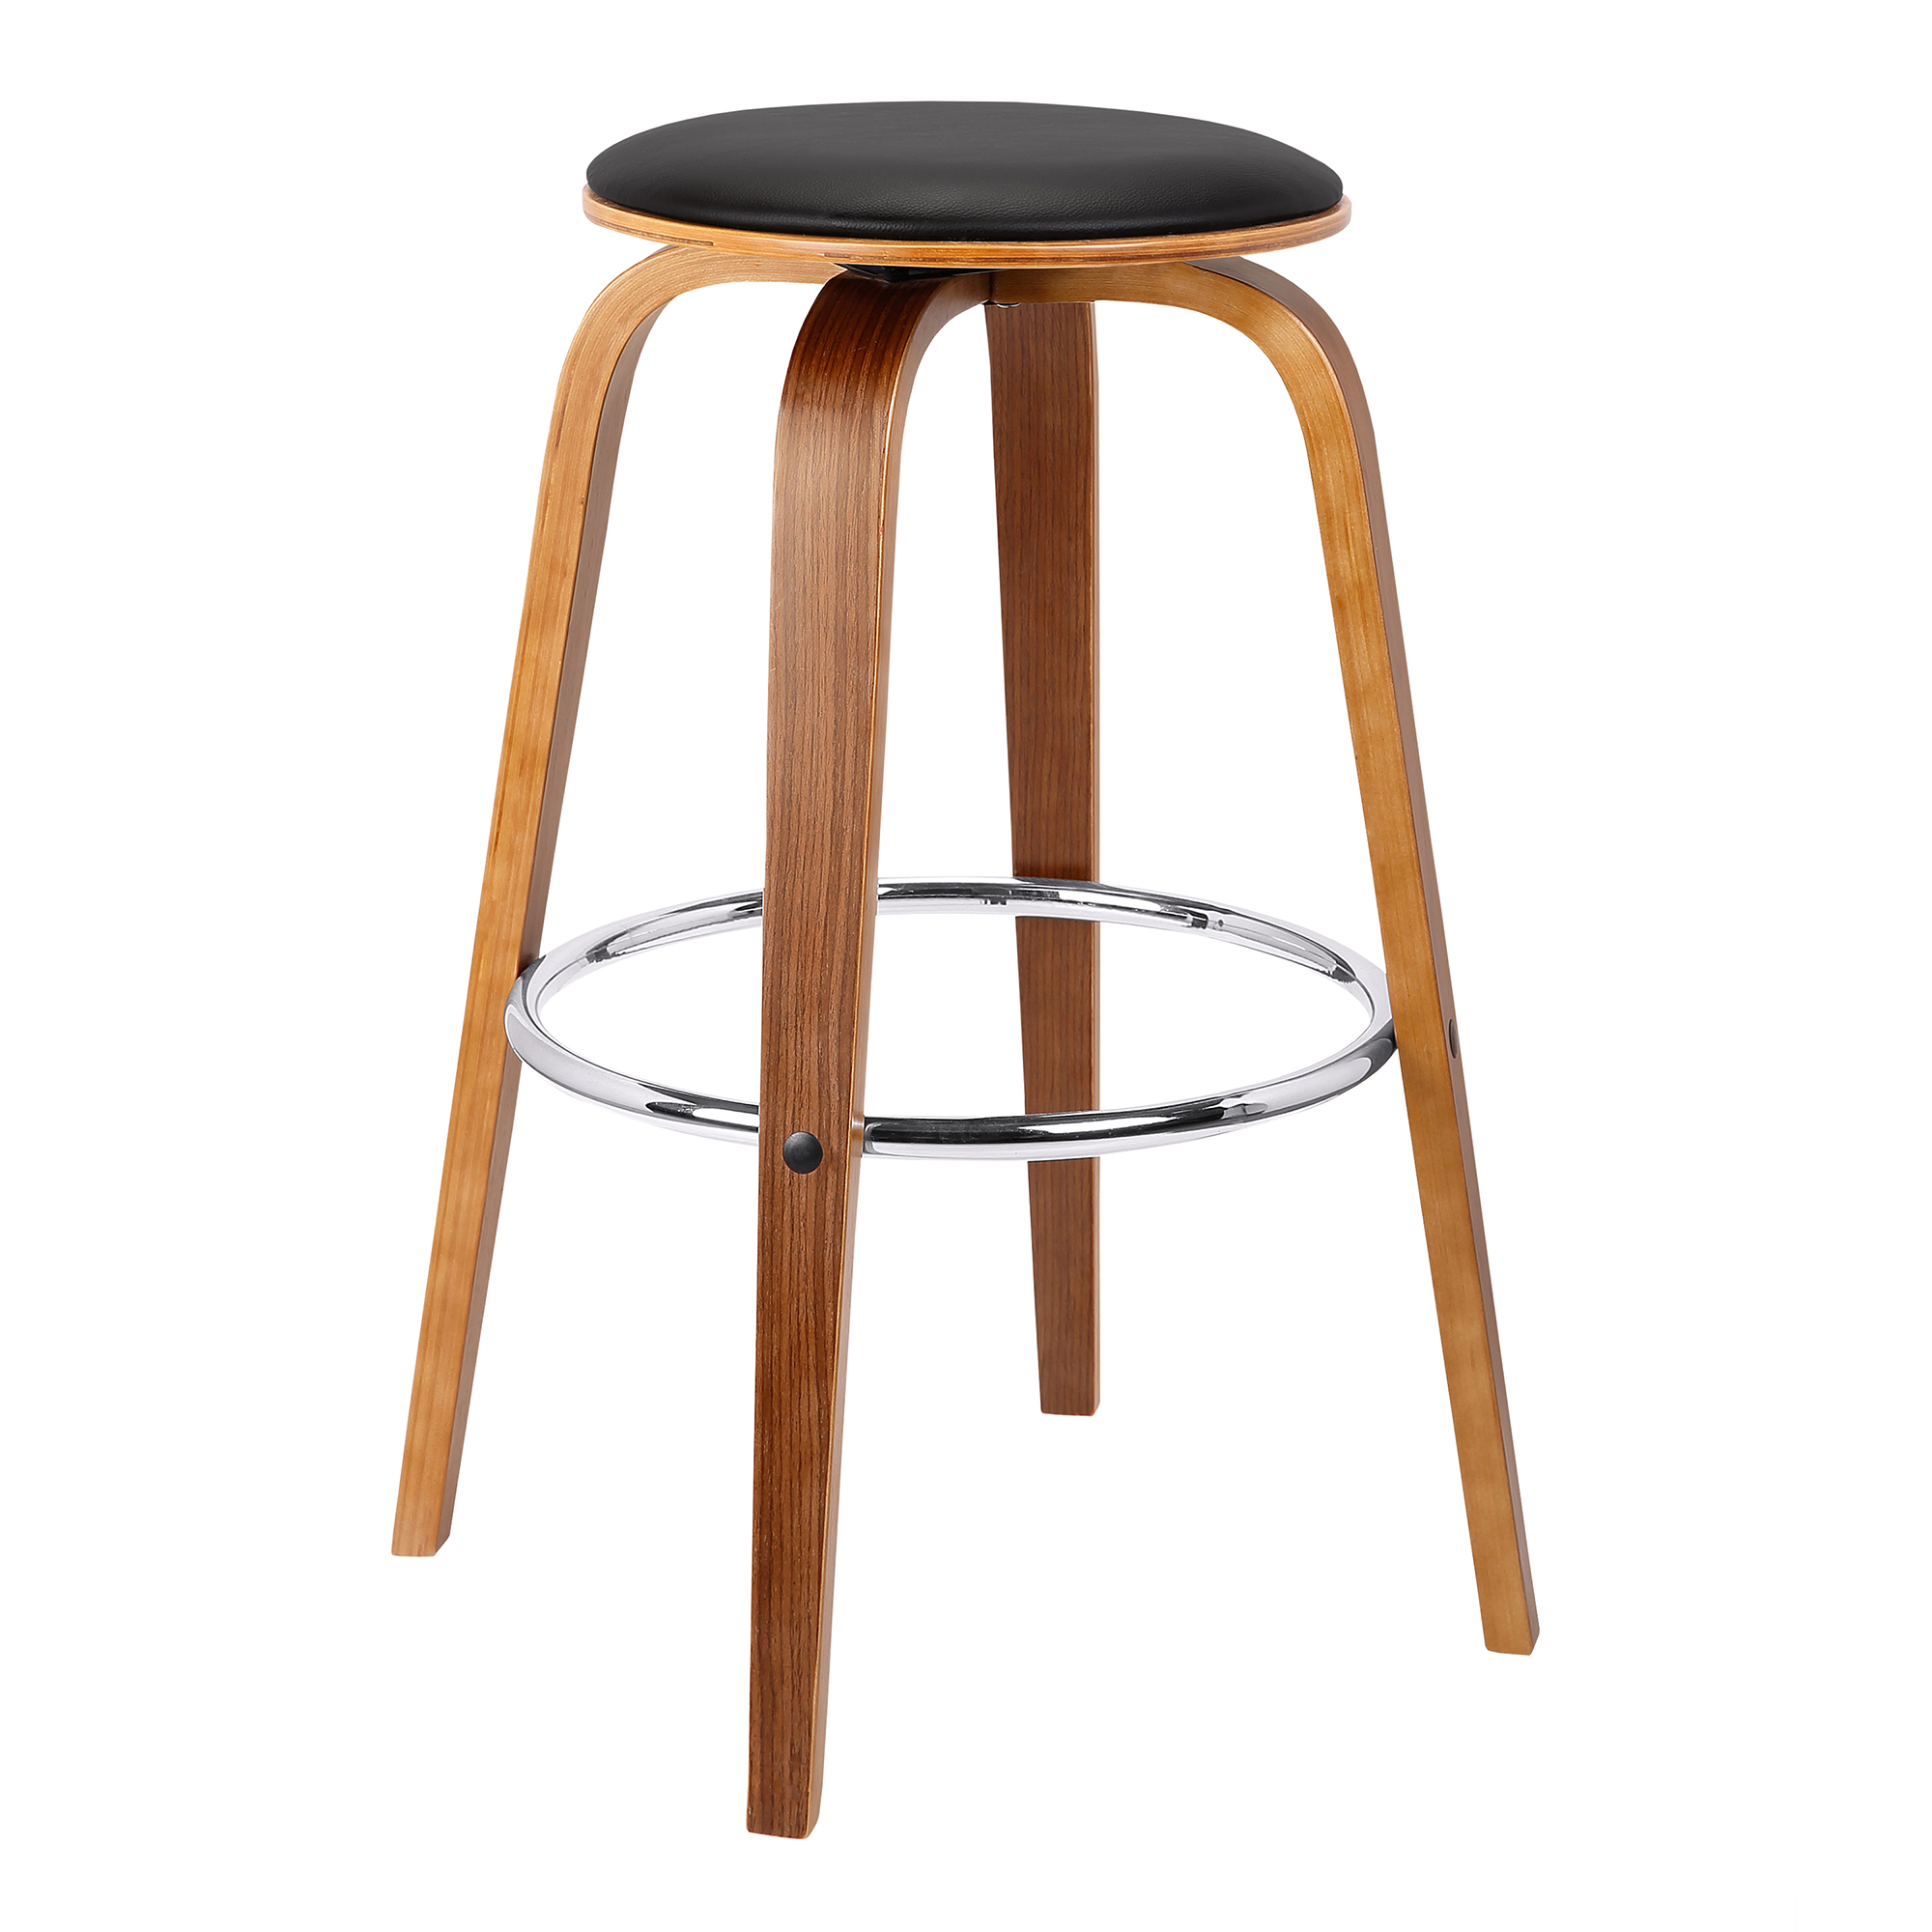 Today's Mentality Brussel Mid-Century Backless Swivel Wood Barstool in Walnut with Black Faux Leather